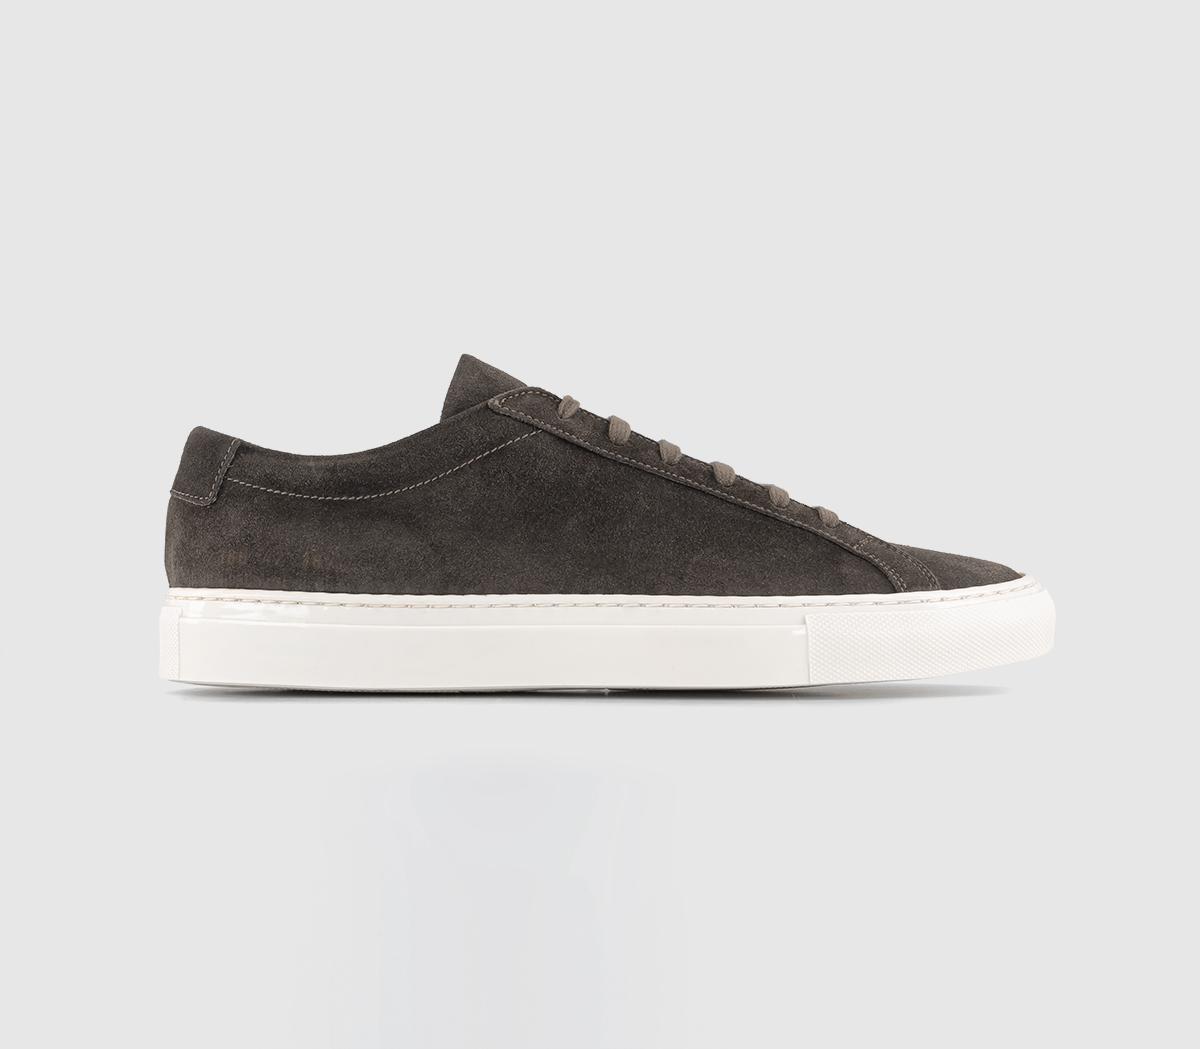 Common ProjectsAchilles Low Trainers Warm Grey Waxed Suede